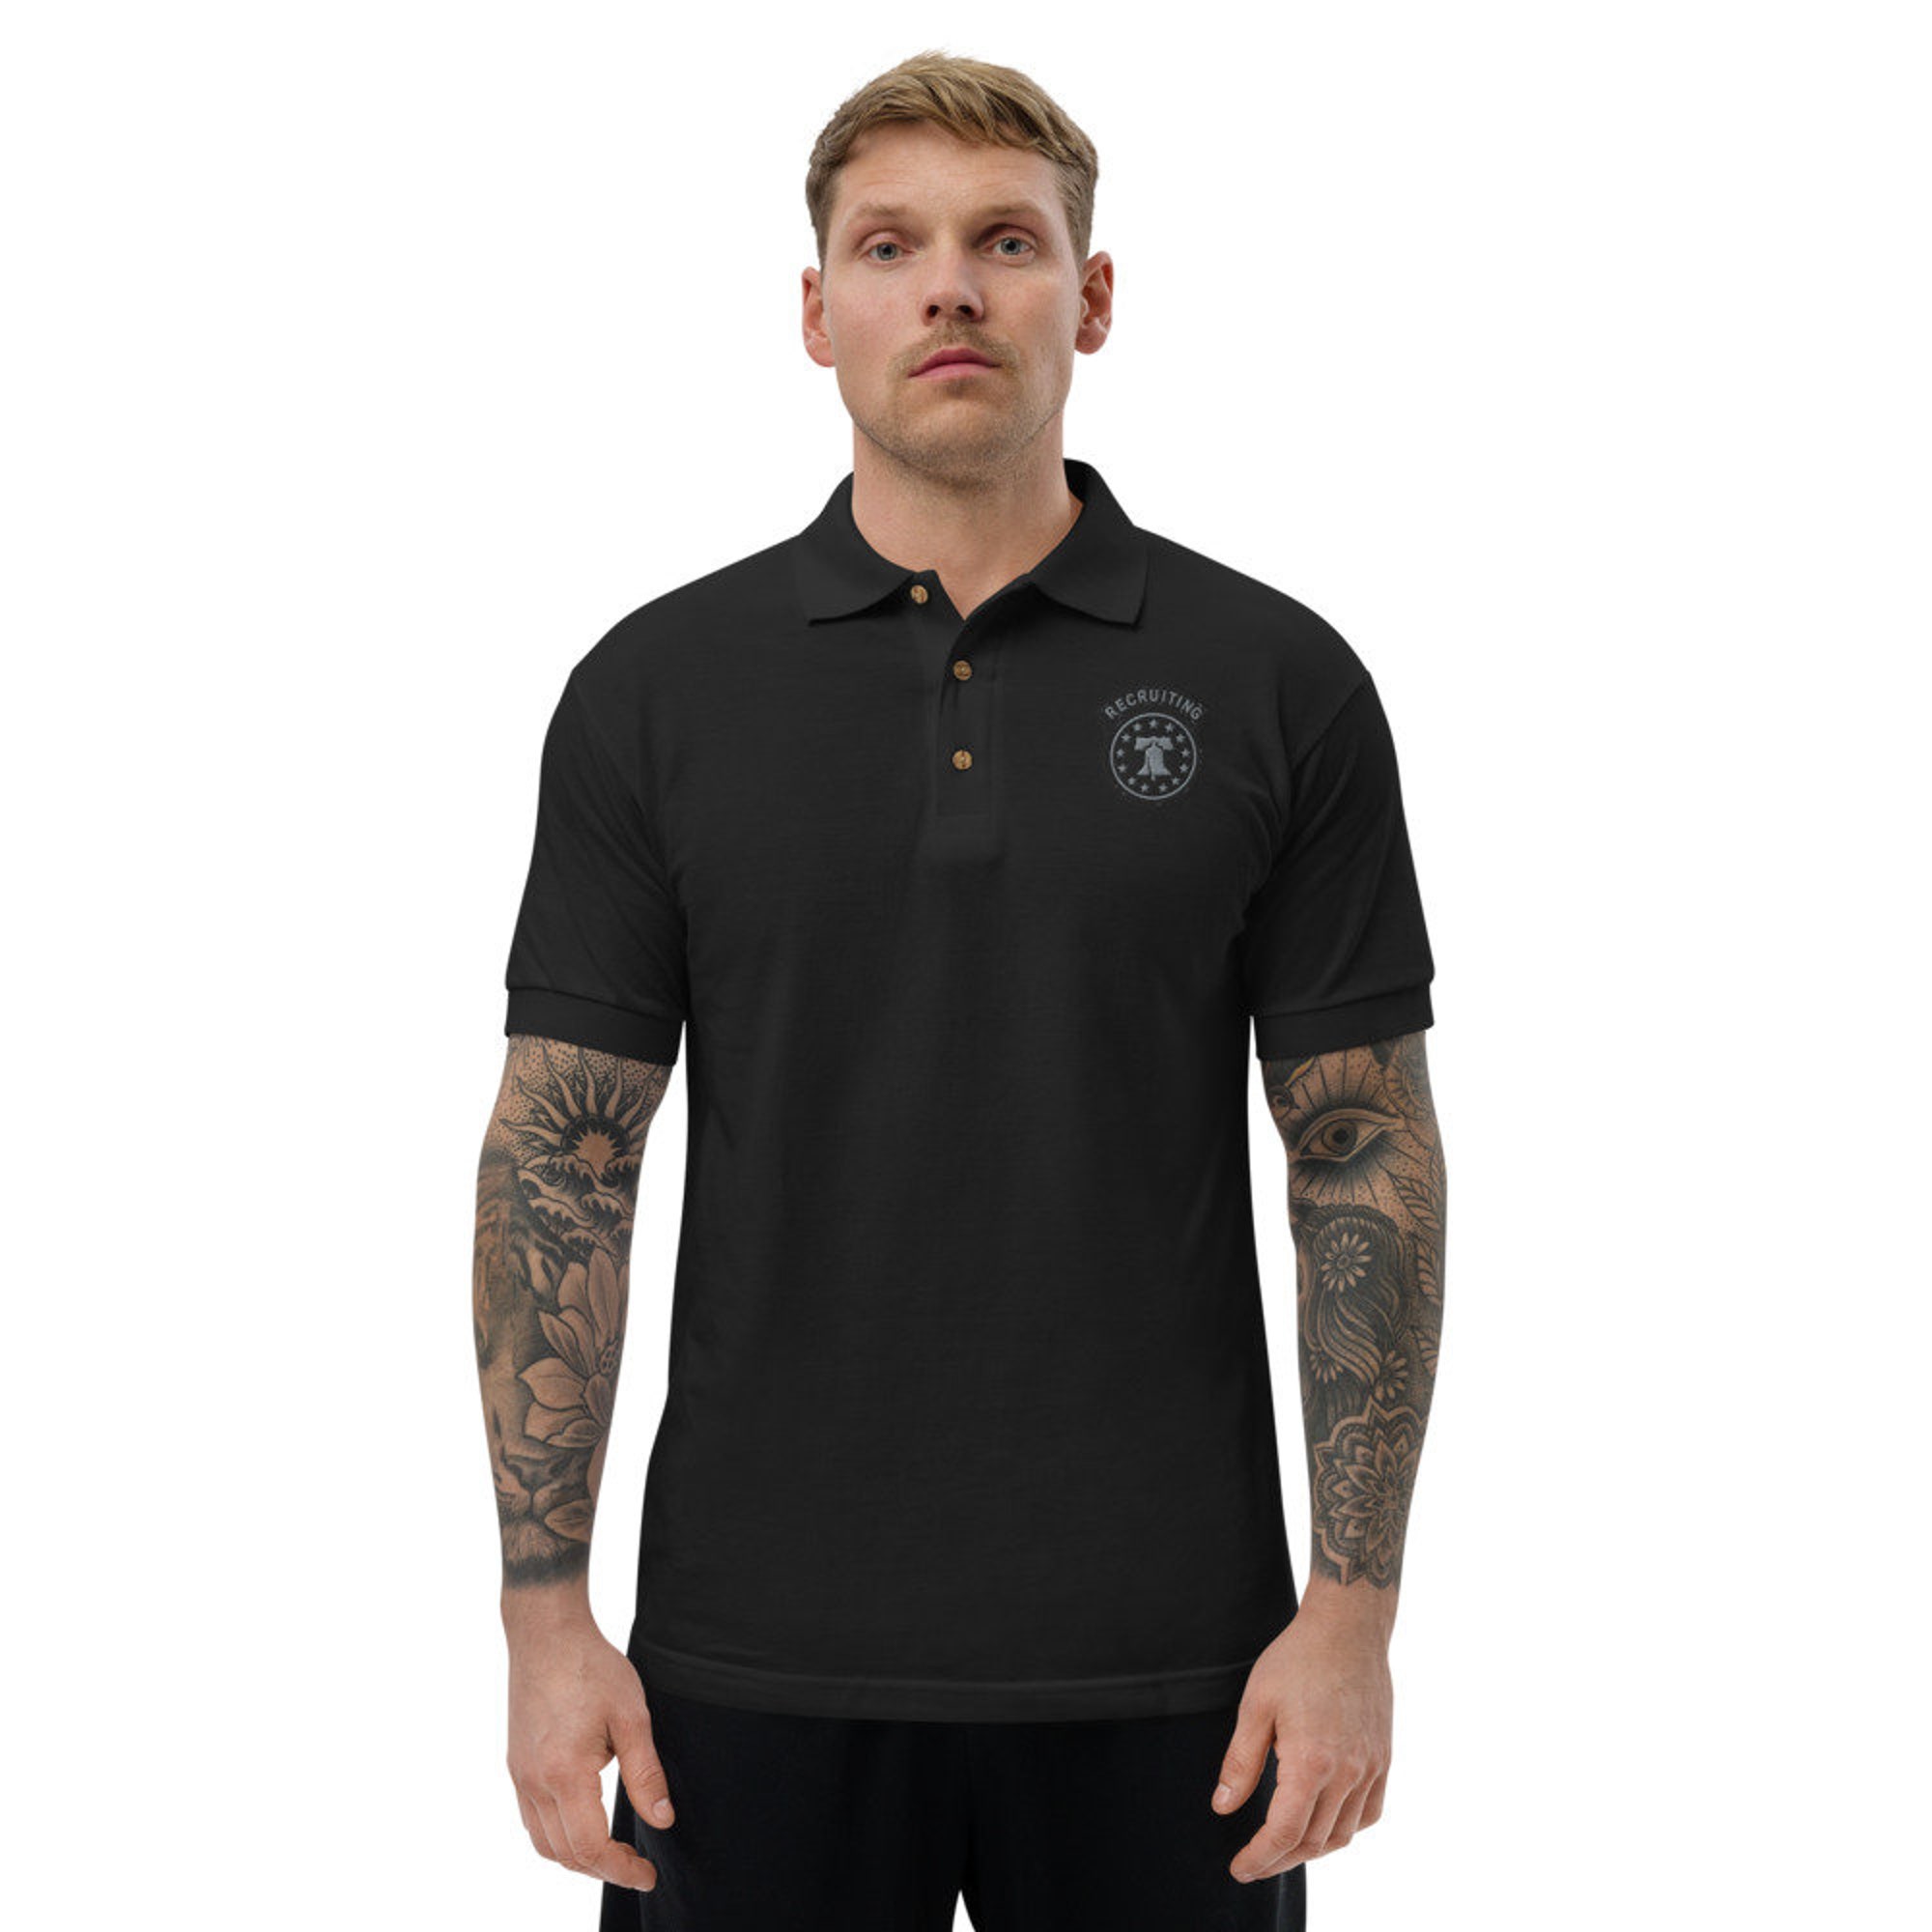 Discover Army Recruiting Embroidered Polo Shirt